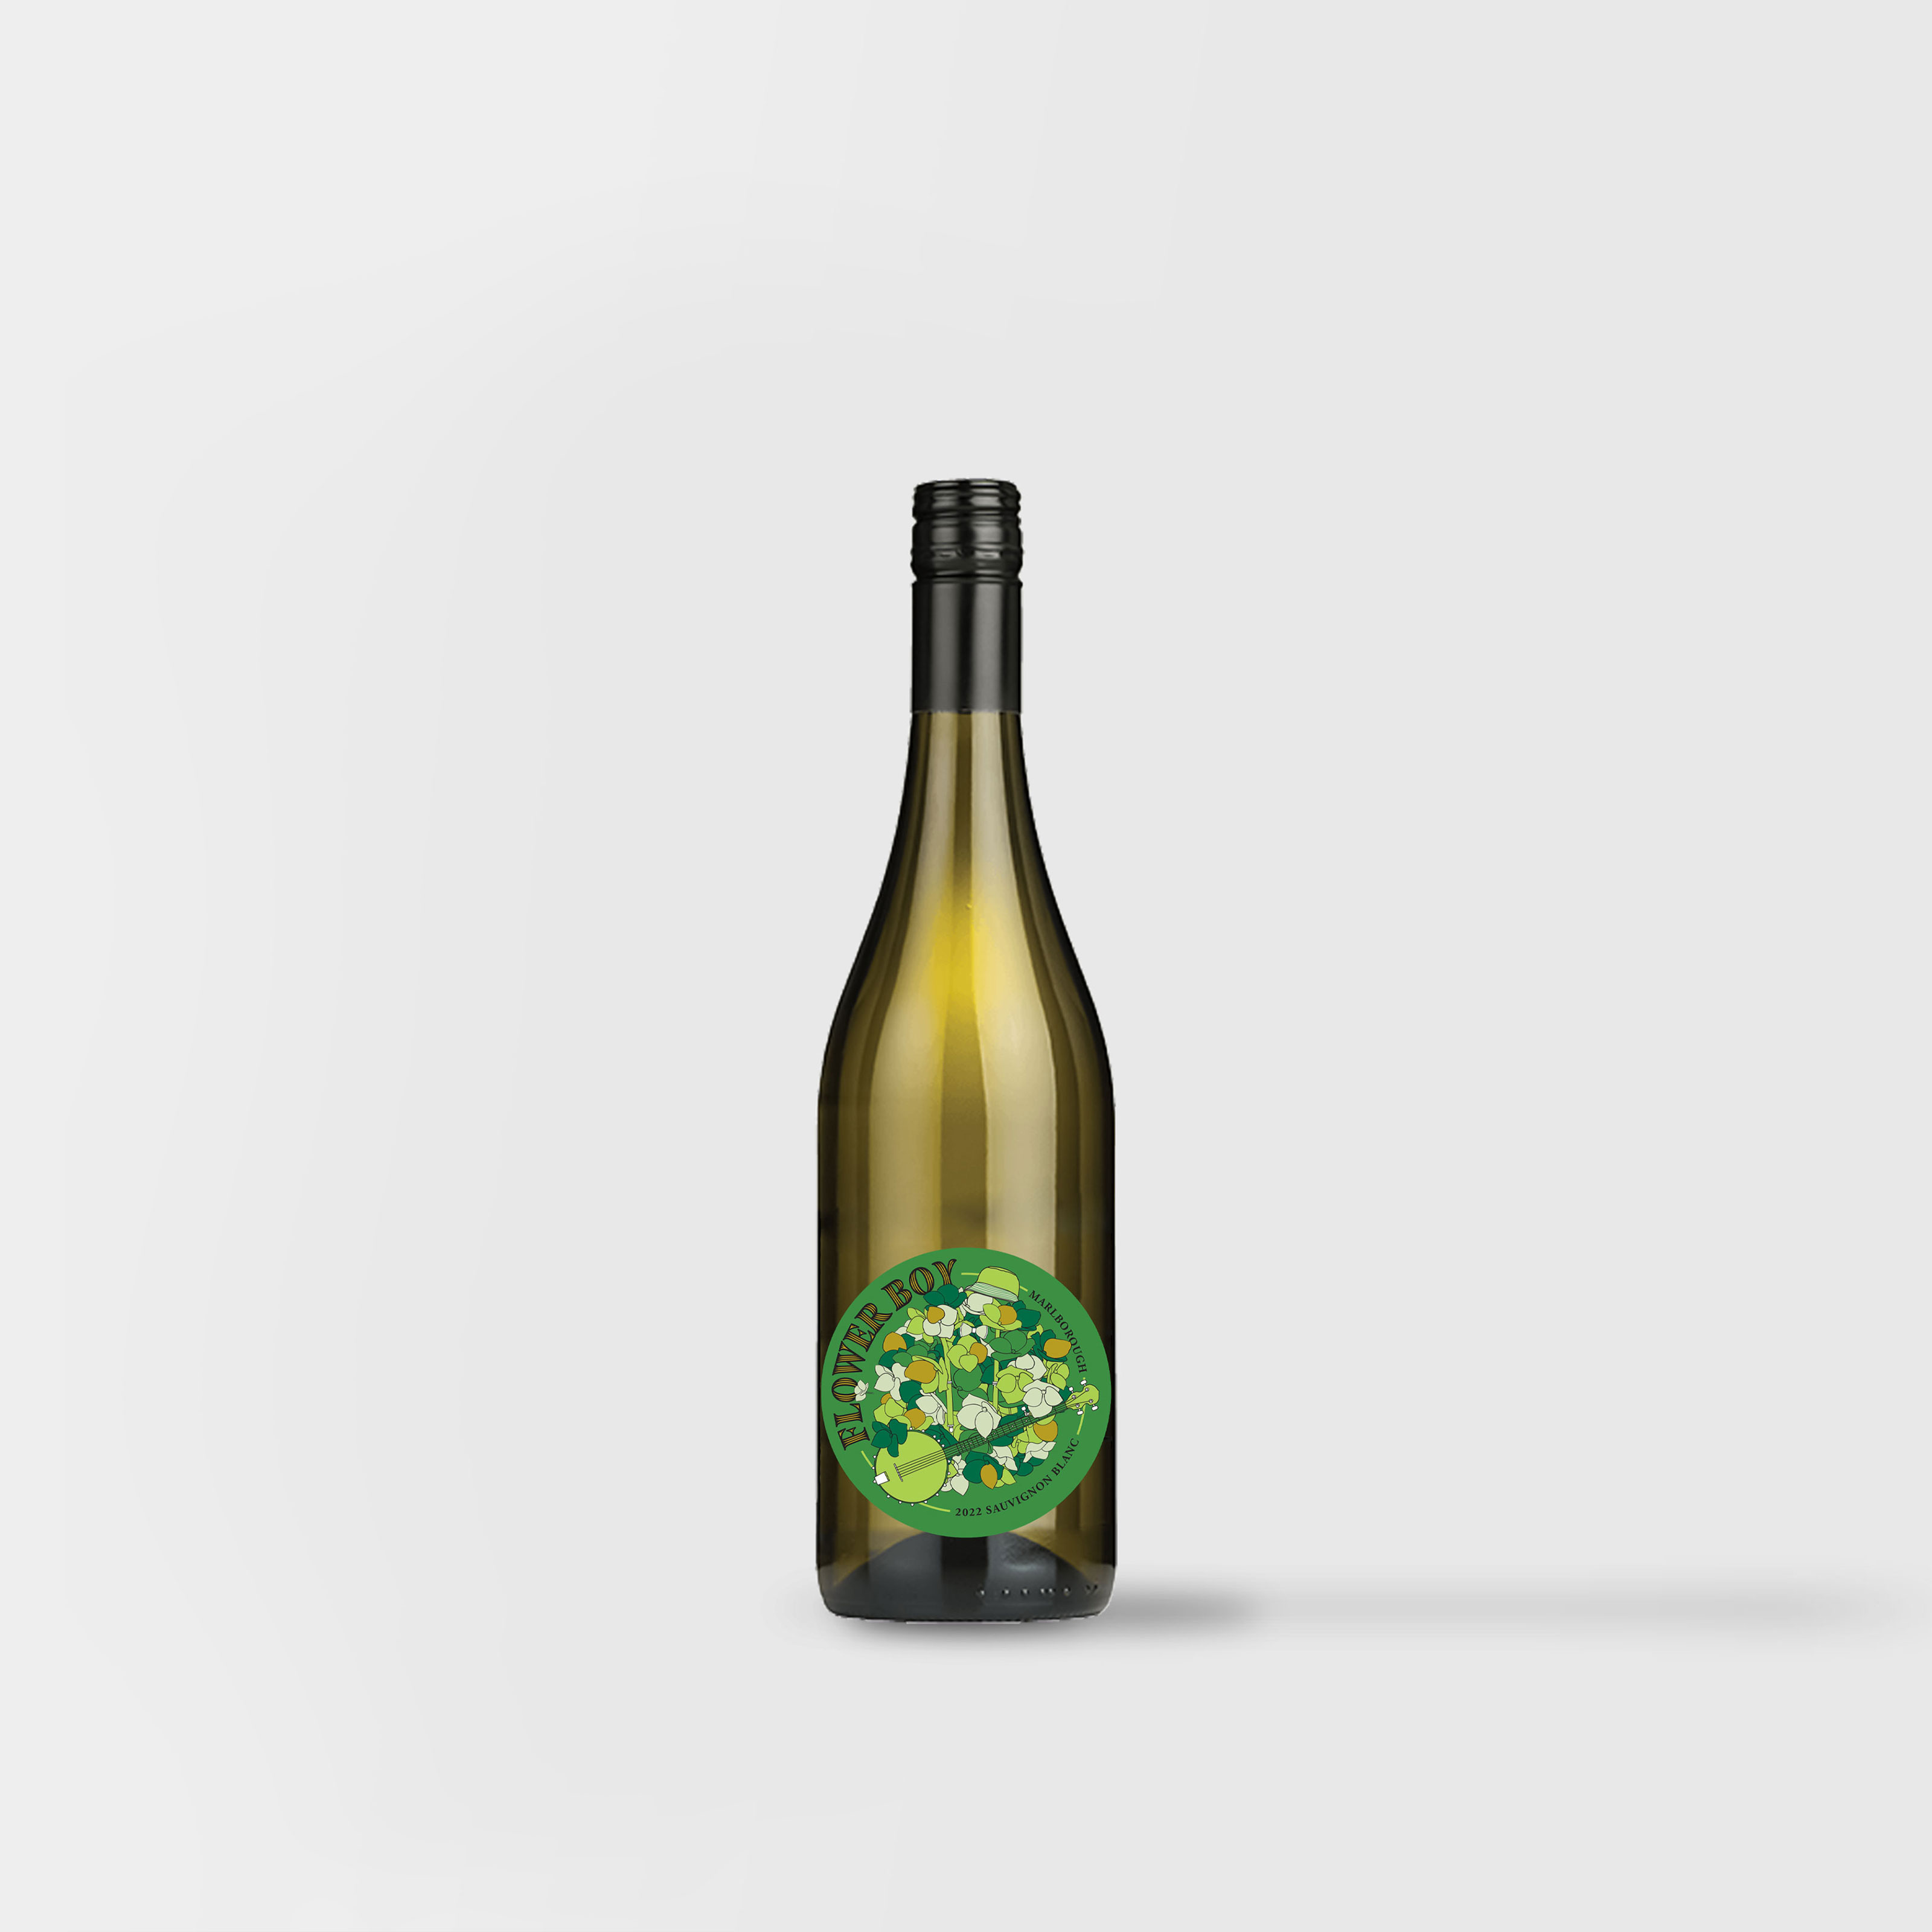 Sacred Hill Yellow NZ Hawkes Online Now Buy Label Chardonnay at - 2022 Vine Bay - Vineonline